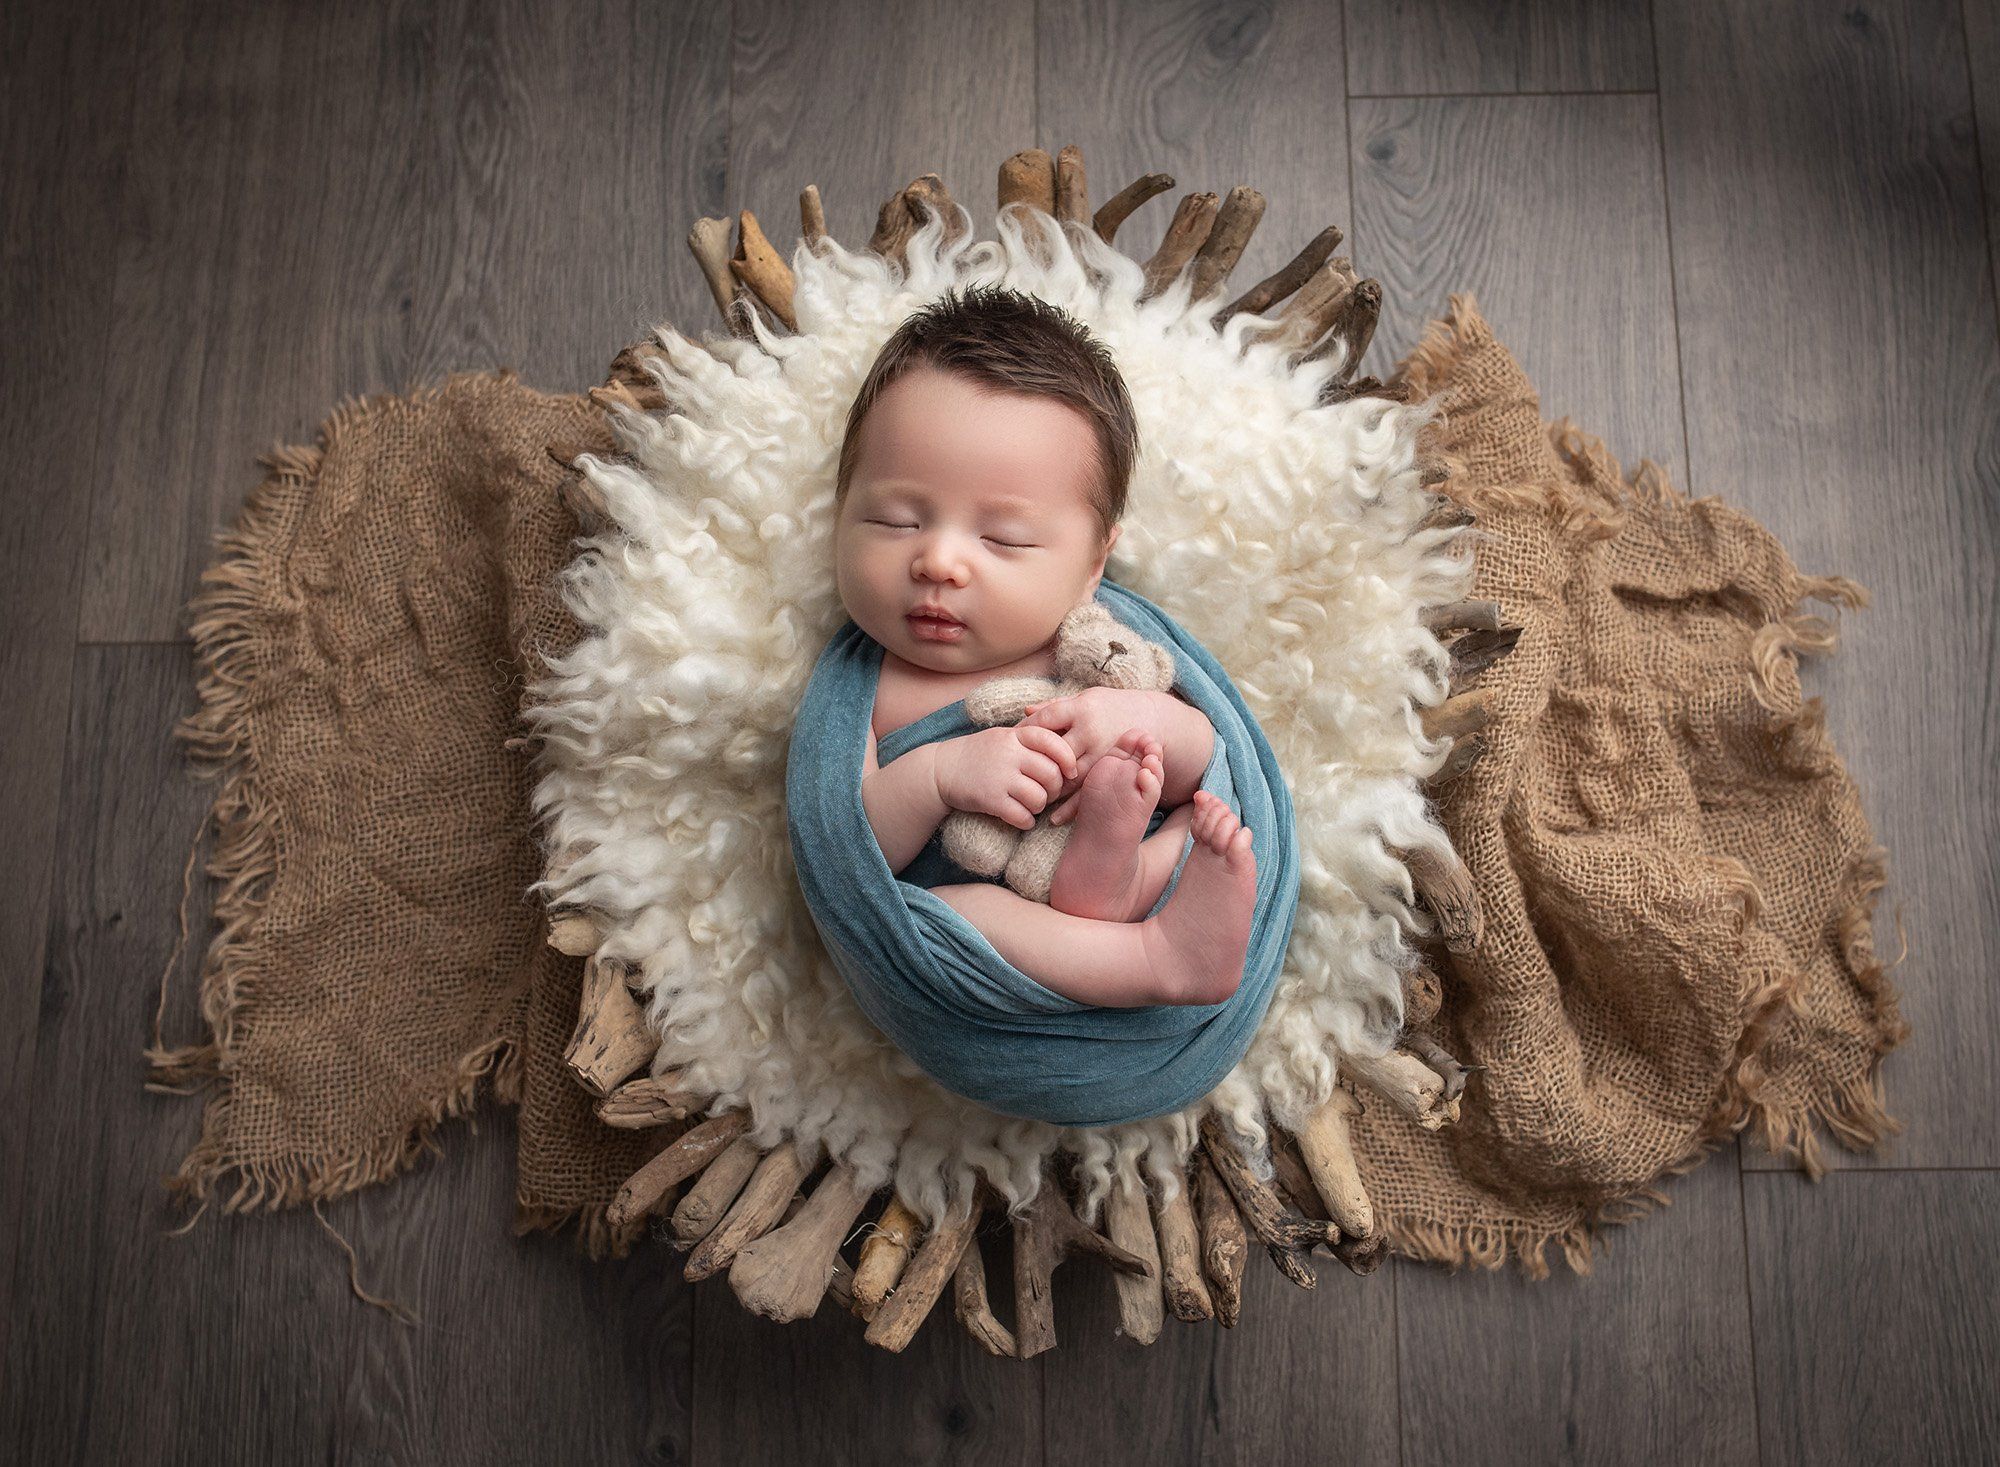 best time to do newborn photos newborn baby boy swaddled in teal with his teddy bear in a driftwood bowl best time to take newborn photos